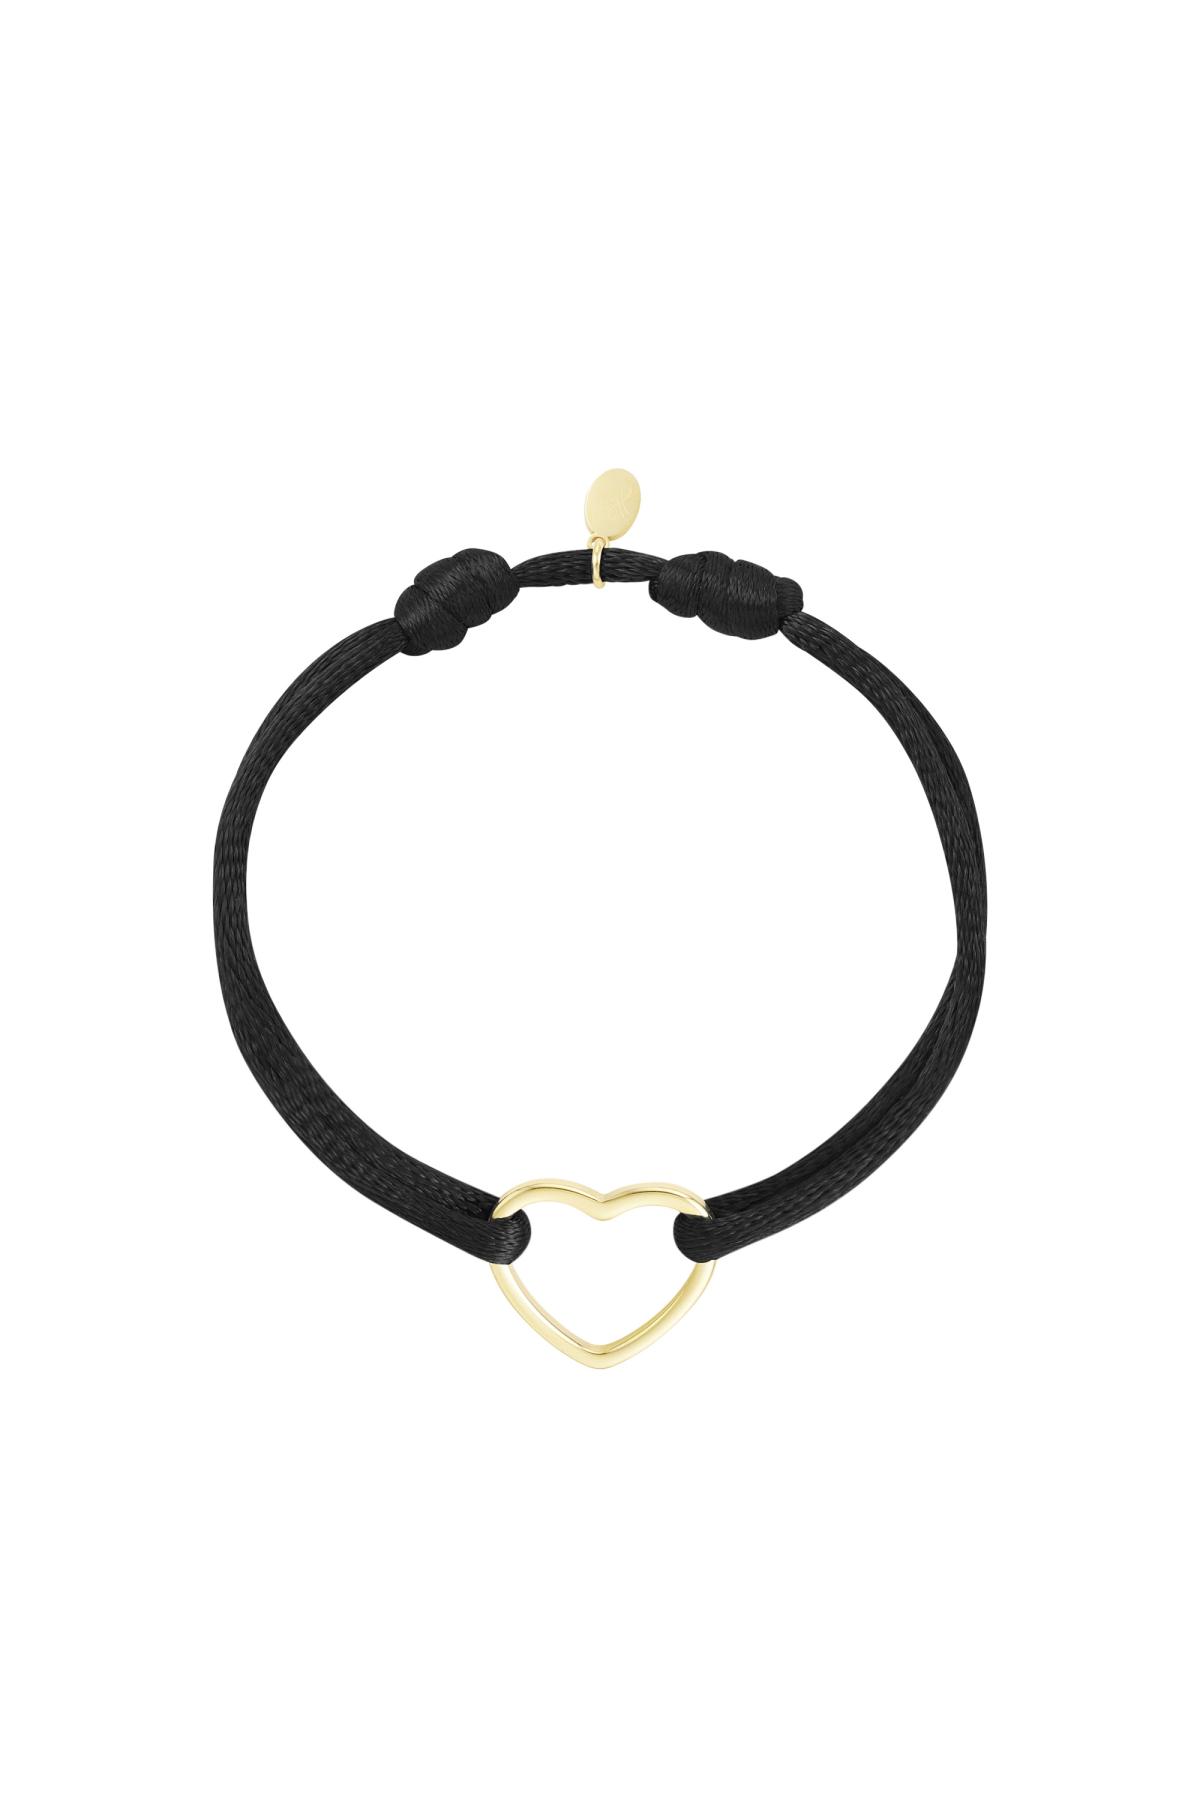 Bracciale in tessuto cuore Black & Gold Stainless Steel h5 